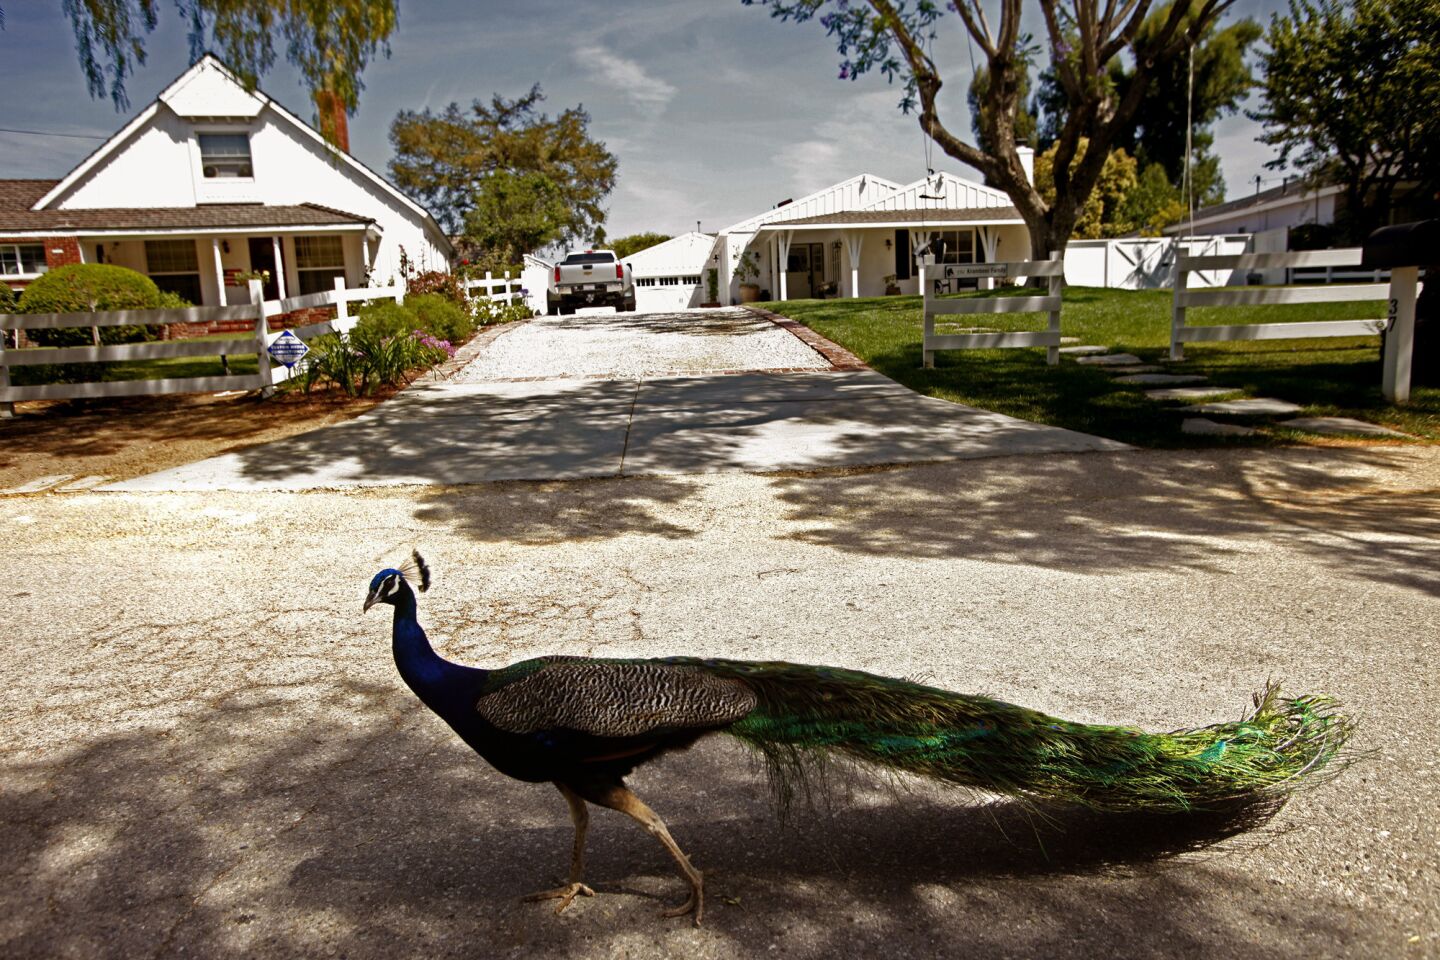 Indian blue peacocks were imported to the Palos Verdes Peninsula a century ago.